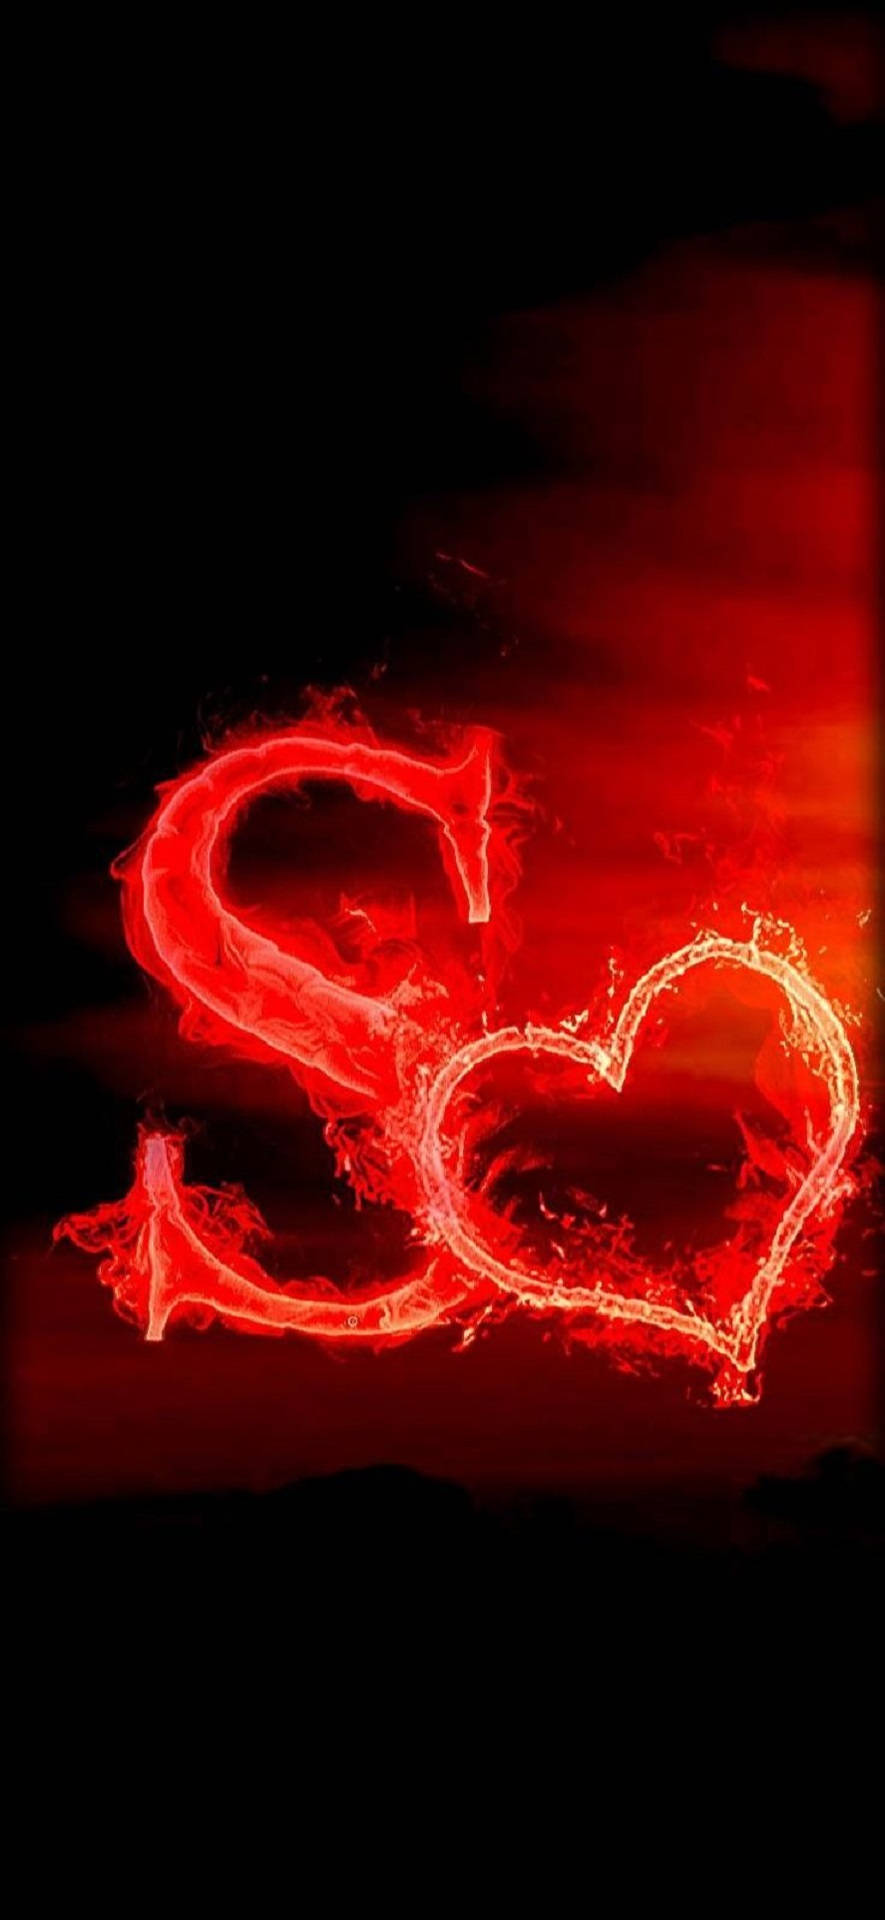 Download Fiery Letter S And Heart Wallpaper 